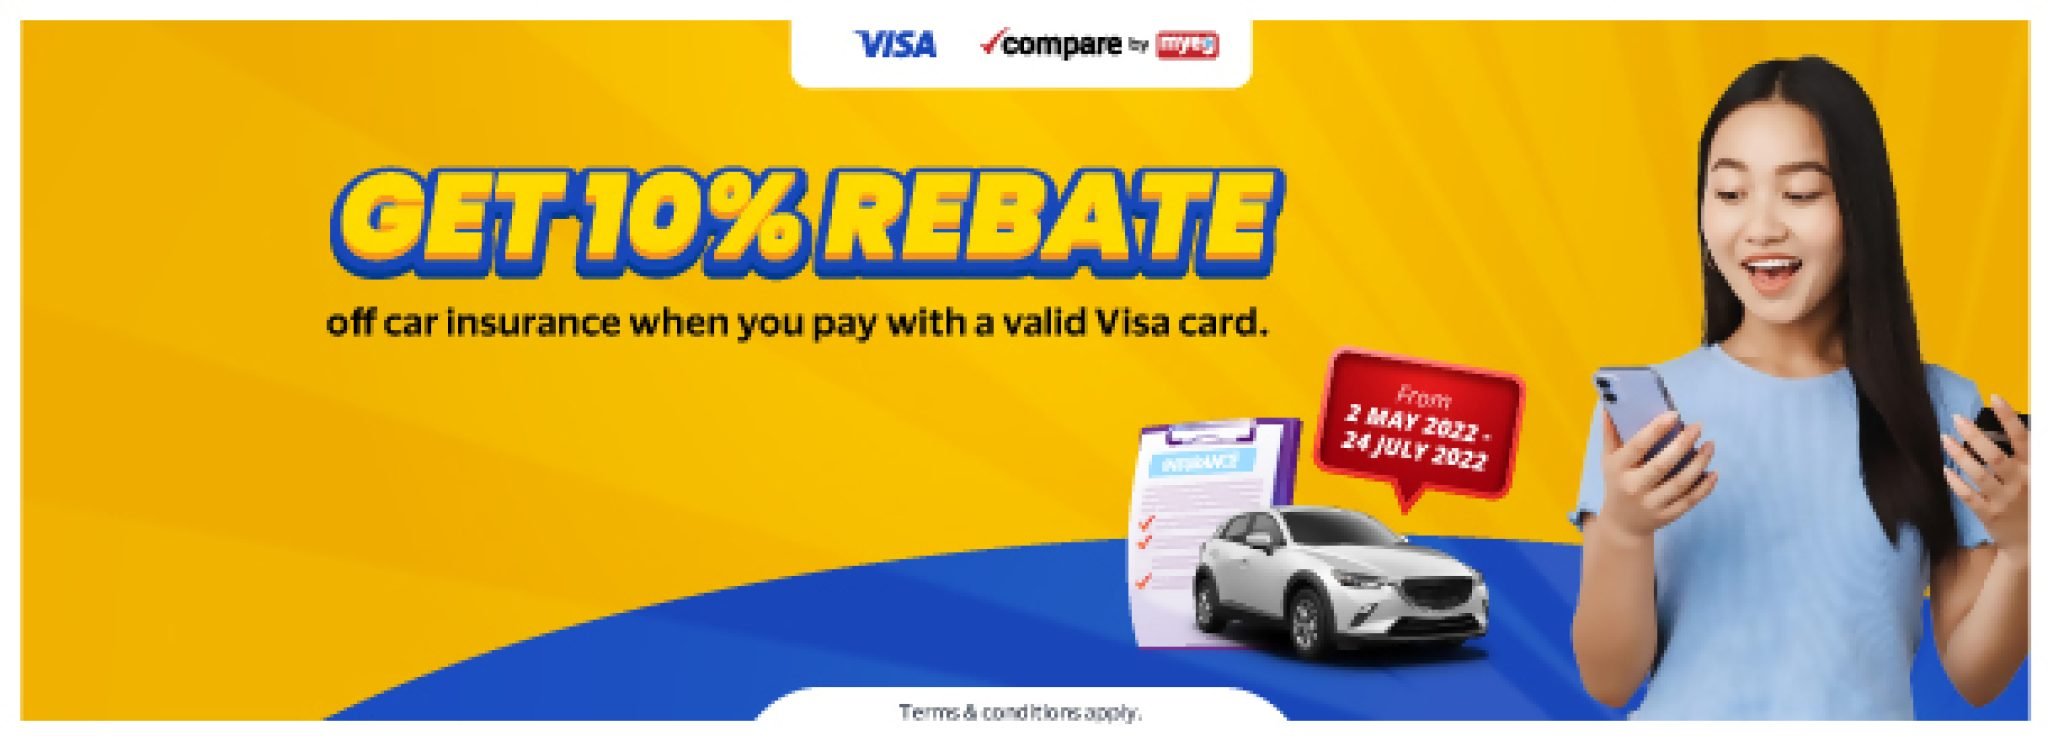 get-10-rebate-off-car-insurance-when-you-pay-with-a-valid-visa-card